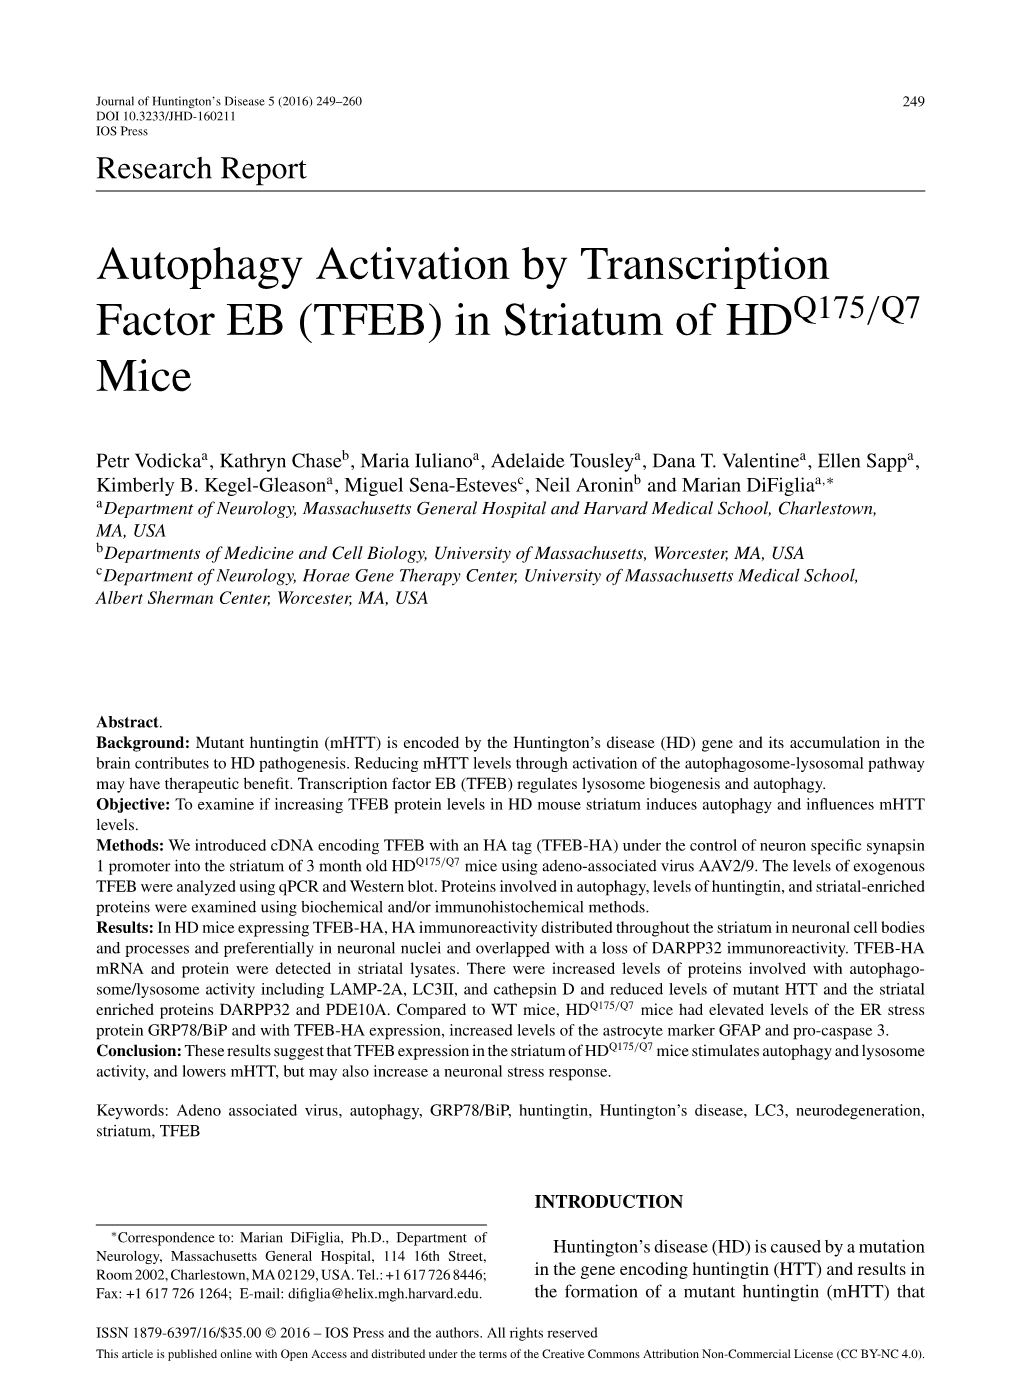 Autophagy Activation by Transcription Factor EB (TFEB) in Striatum of HD Mice